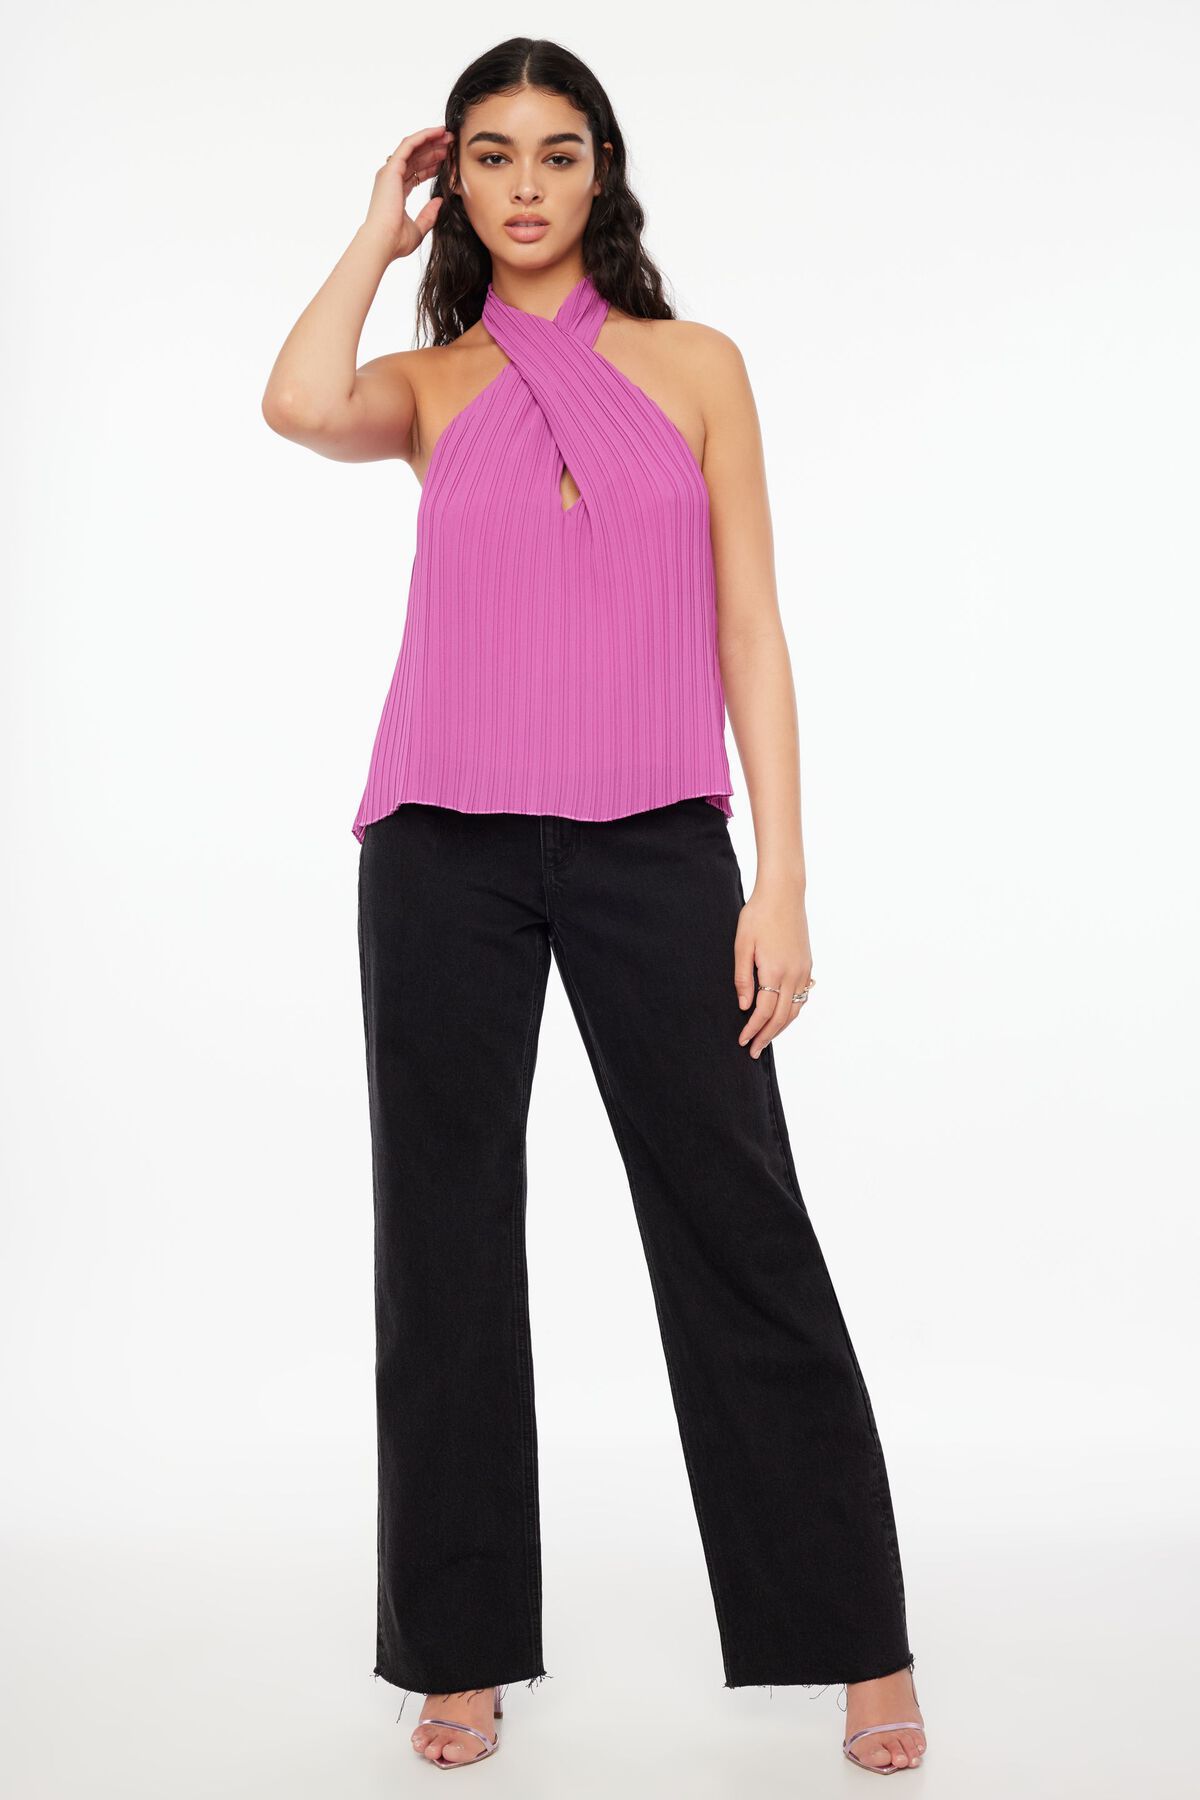 Dynamite Halter Pleated Top. 2